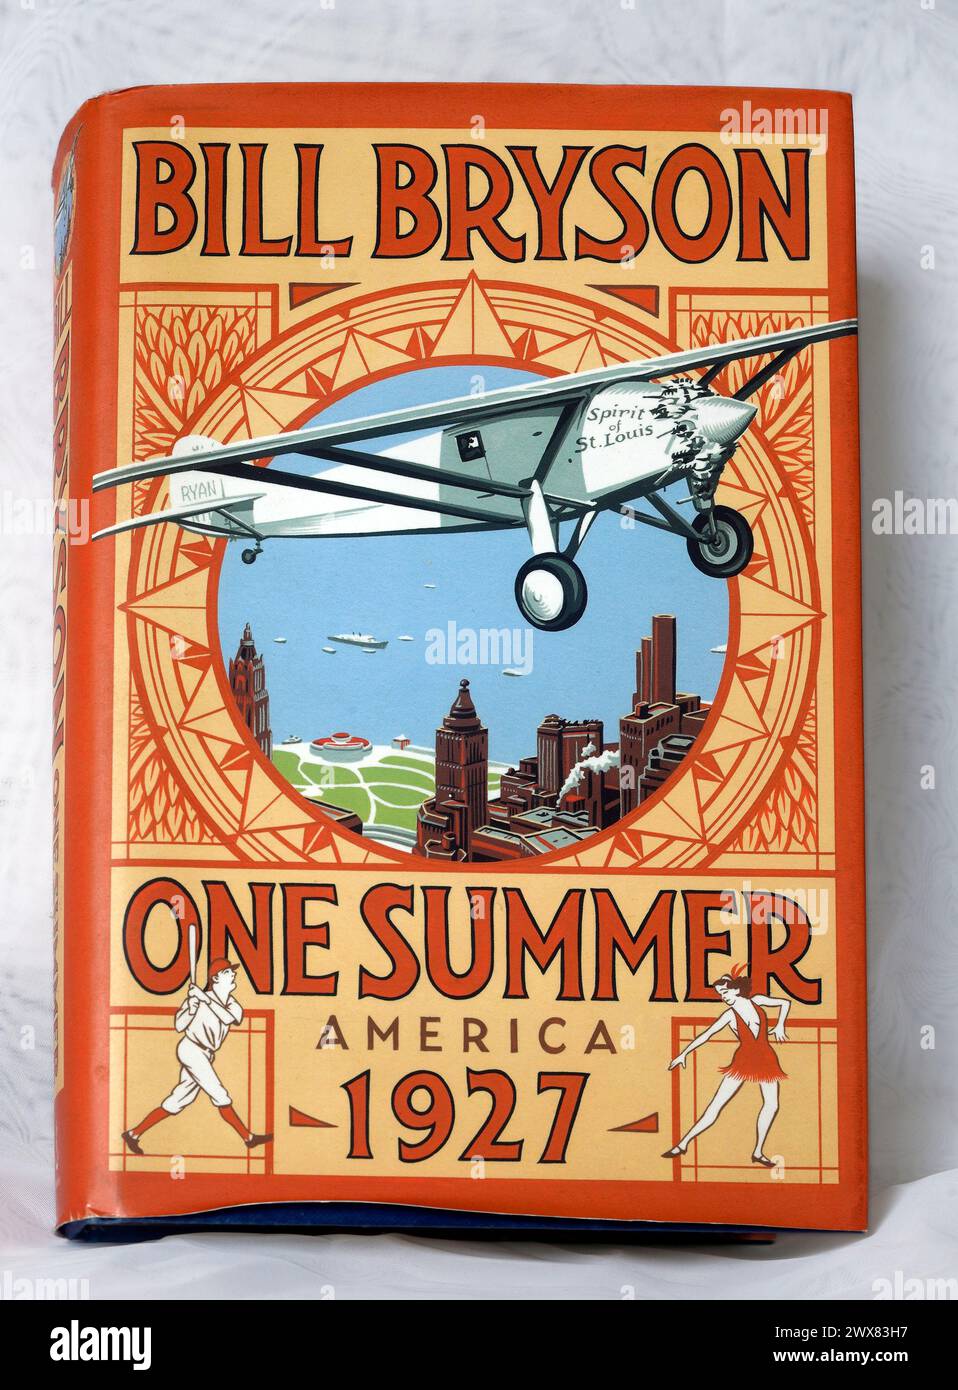 One Summer, America 1927 by Bill Bryson. Studio set up of a book cover on pale background. Stock Photo